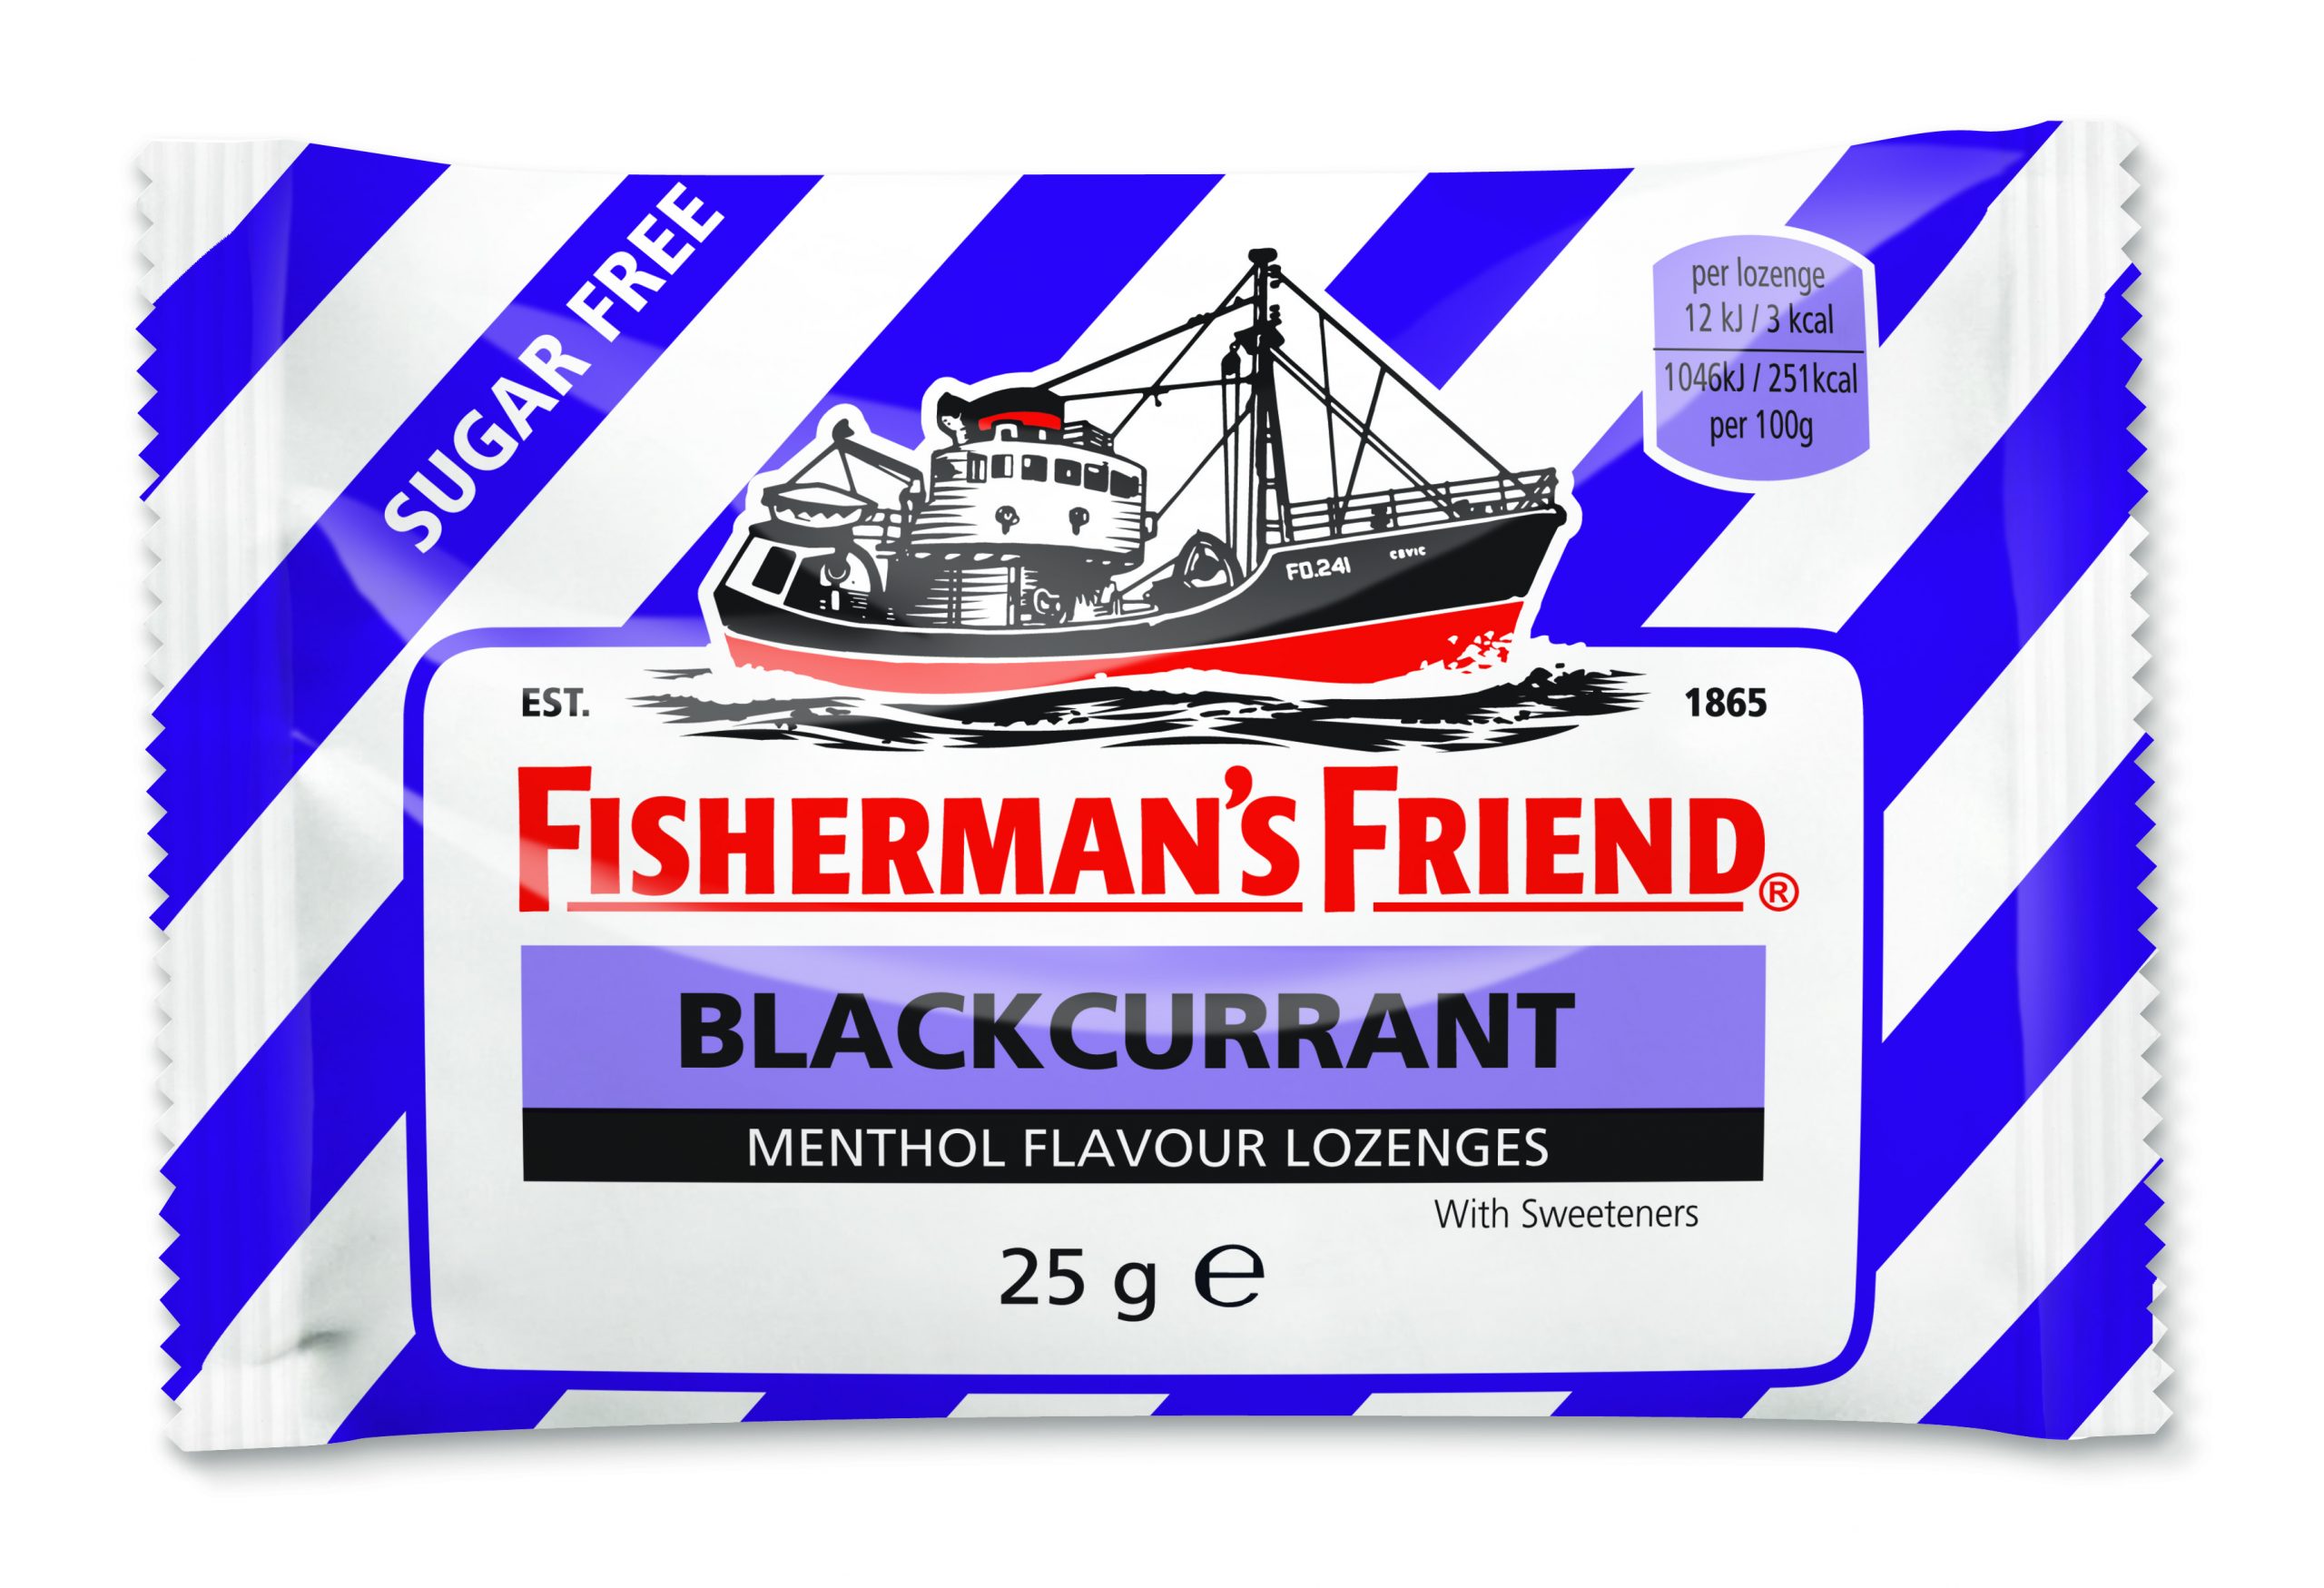 Heat up your hayfever sales with Fisherman’s Friend